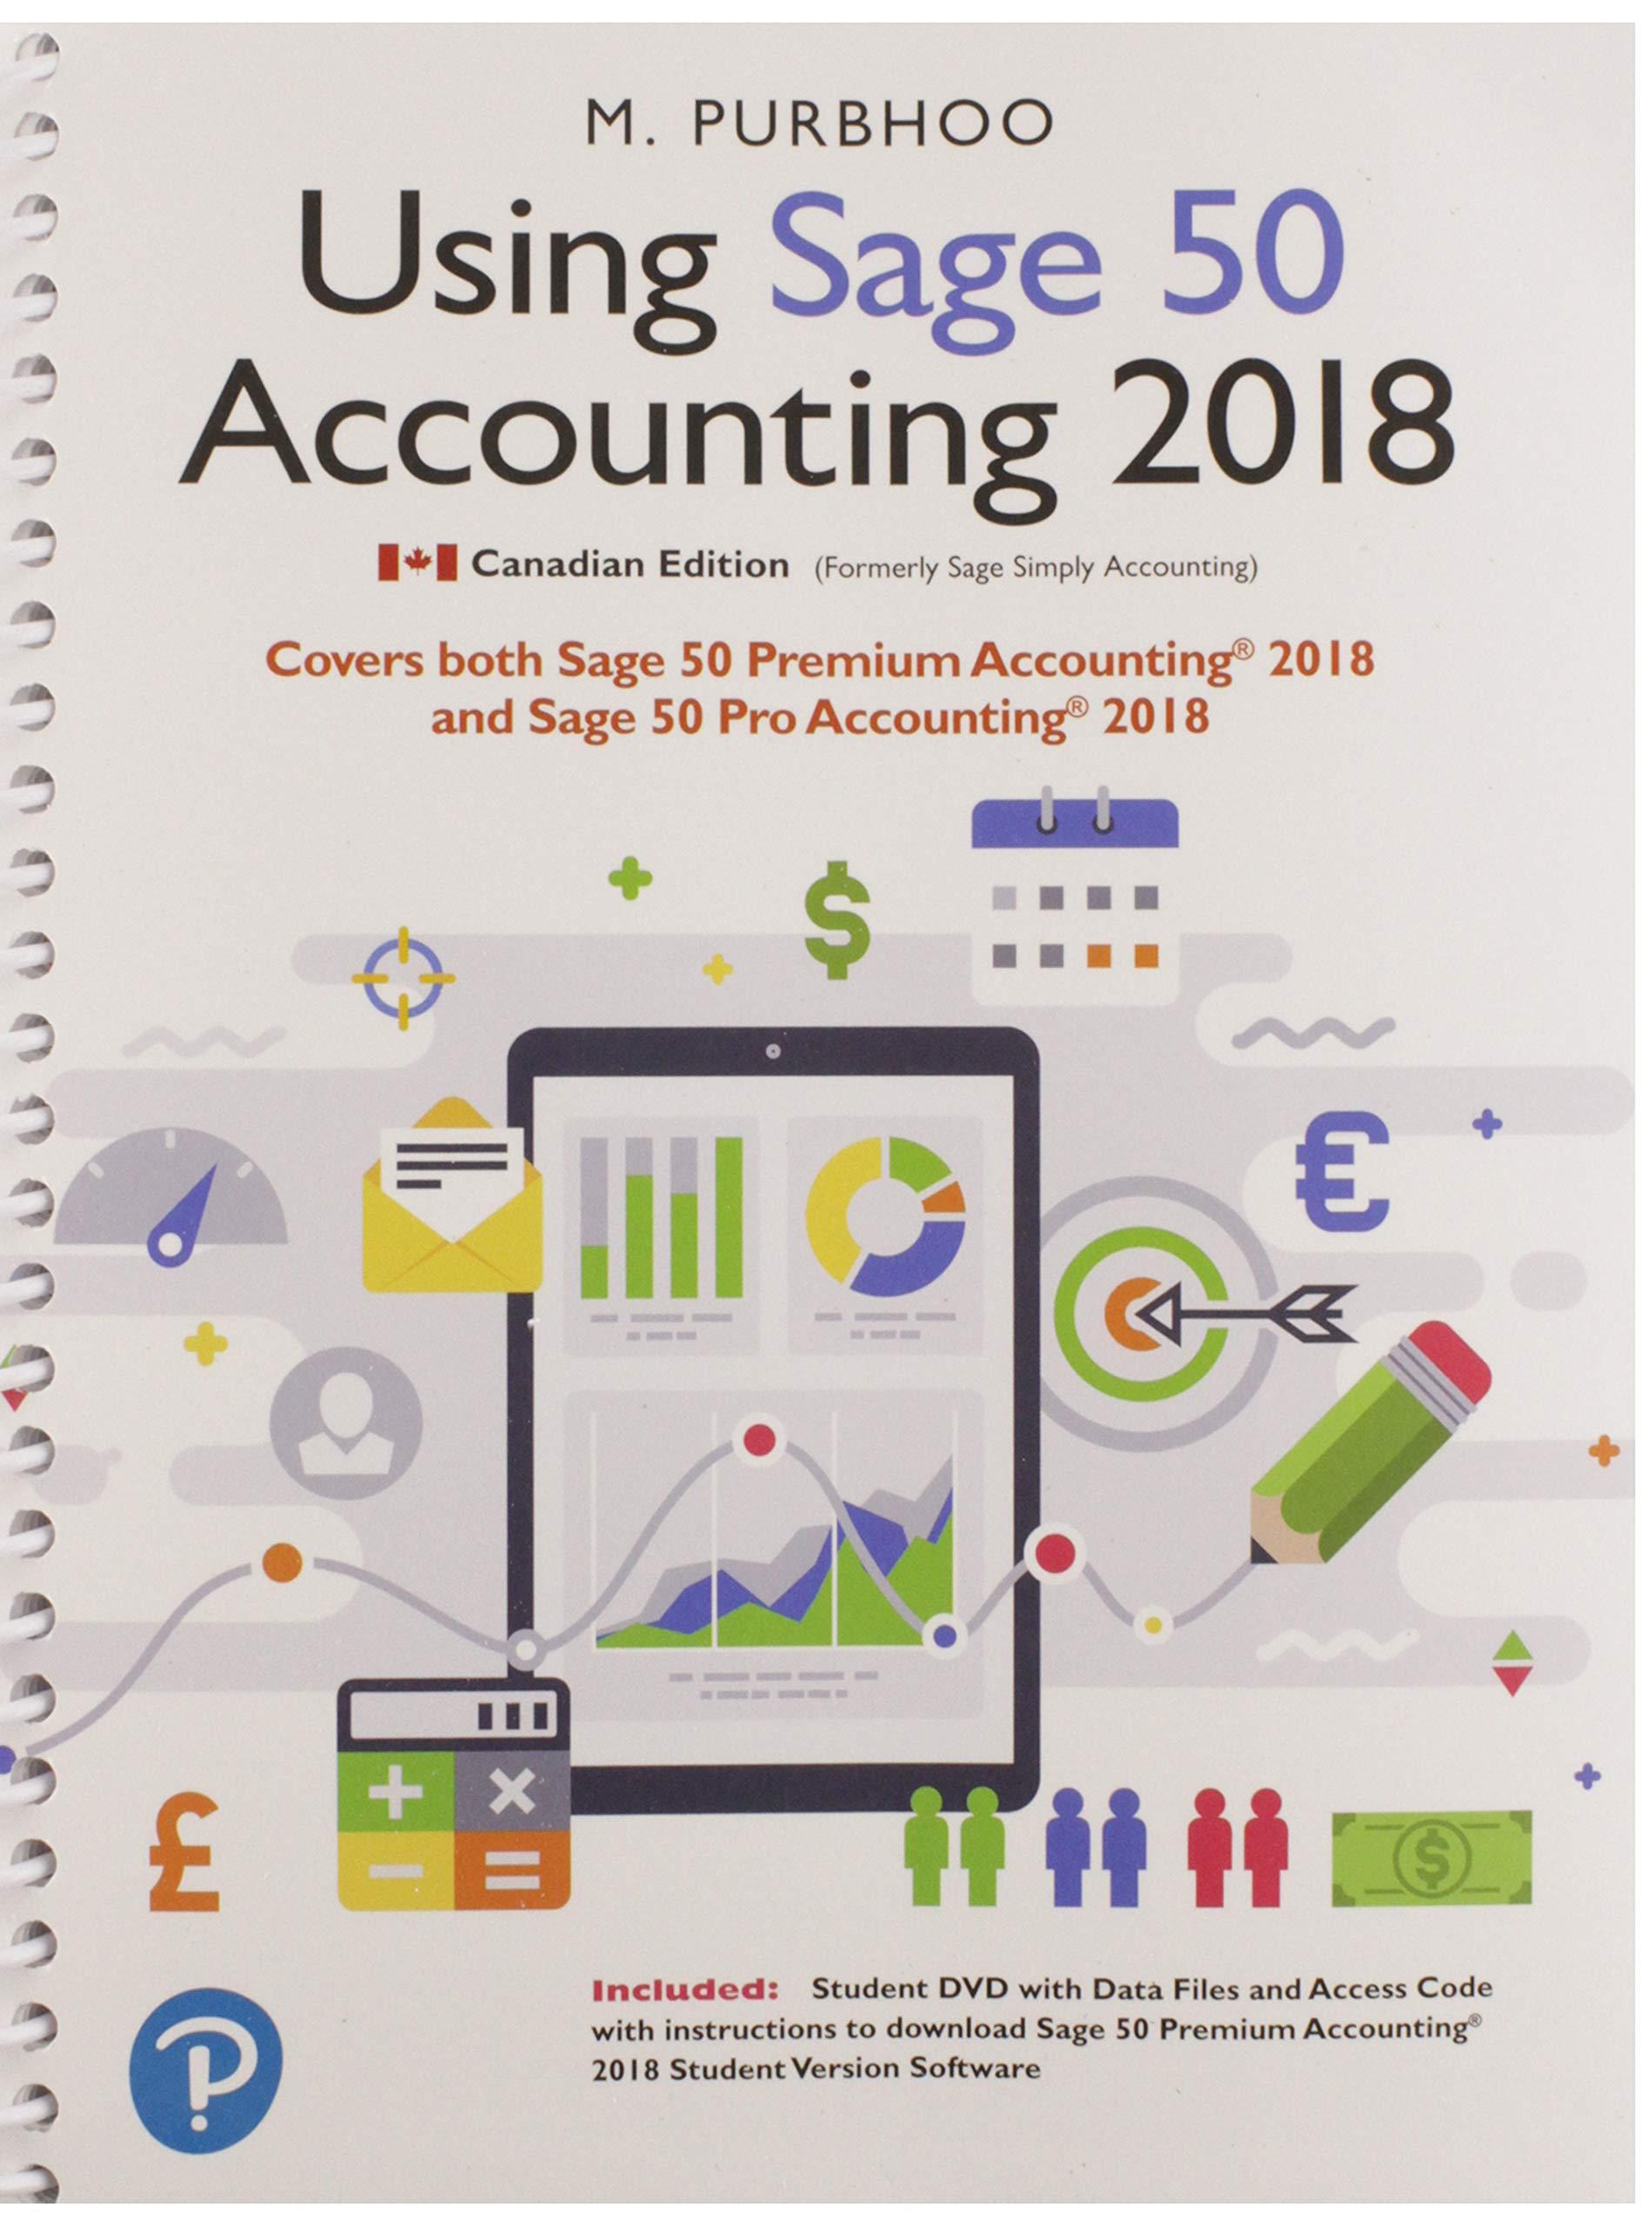 using sage 50 accounting 2018 1st canadian edition mary purbhoo 0134859685, 978-0134859682